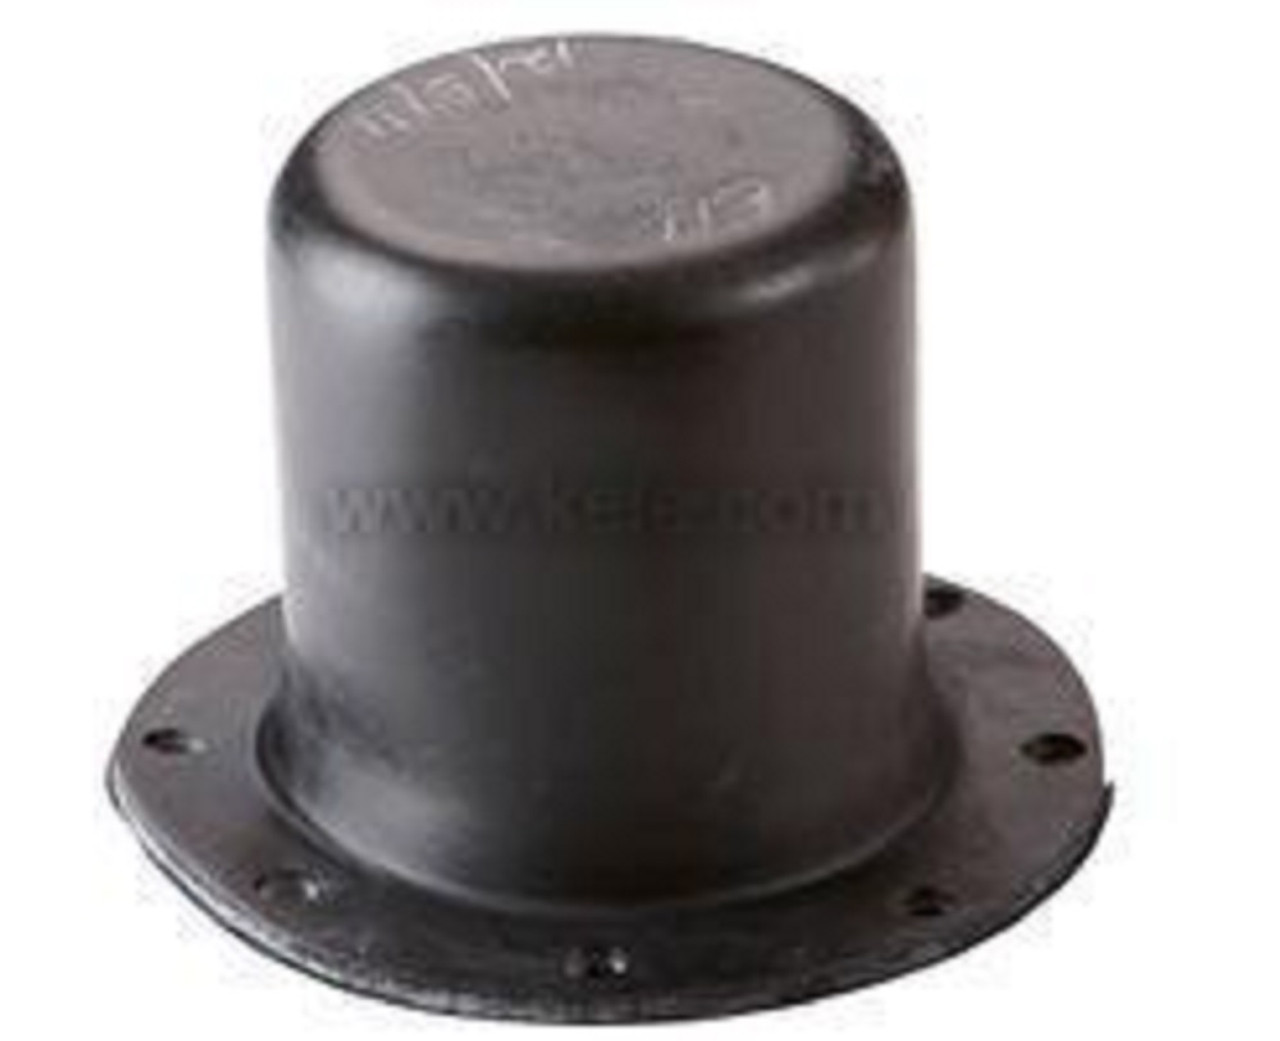 Johnson Controls D-251-6002 No 2 Diaphragm Replacement for Damper Actuator [New]